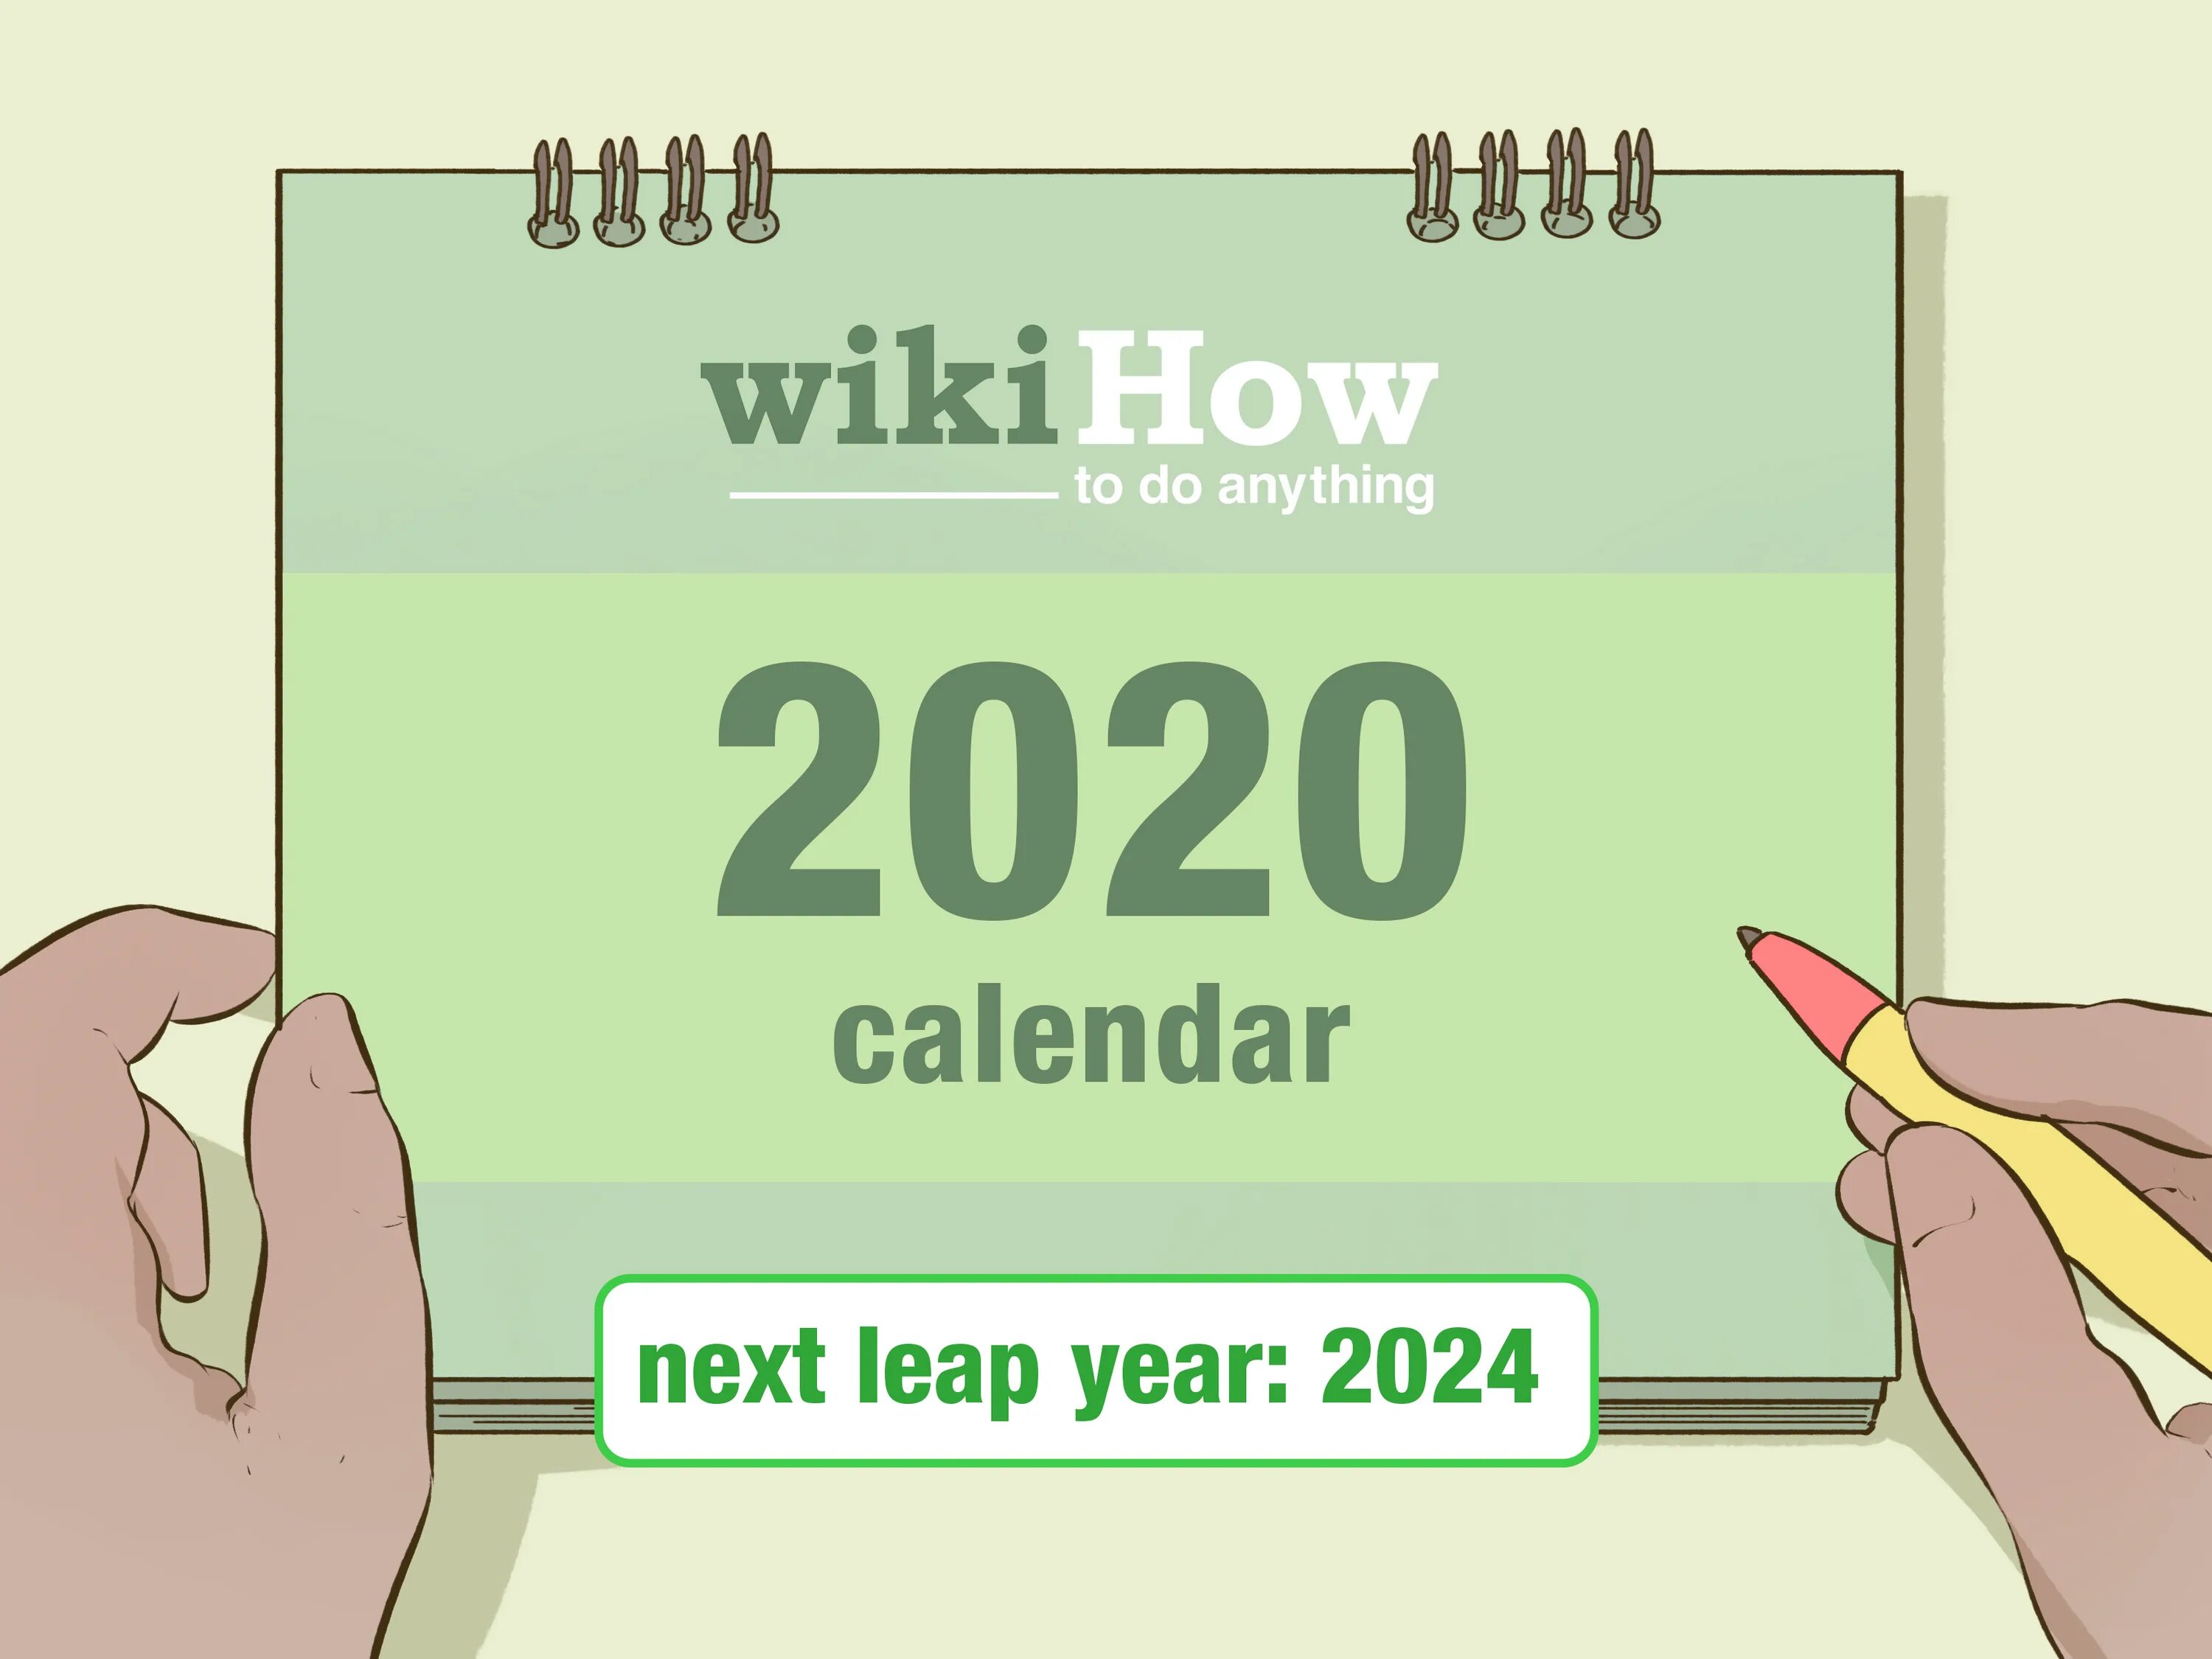 The year is 2024. Leap year list. Високосный год в js. 2024 Год високосный. Leap year covrik.com.